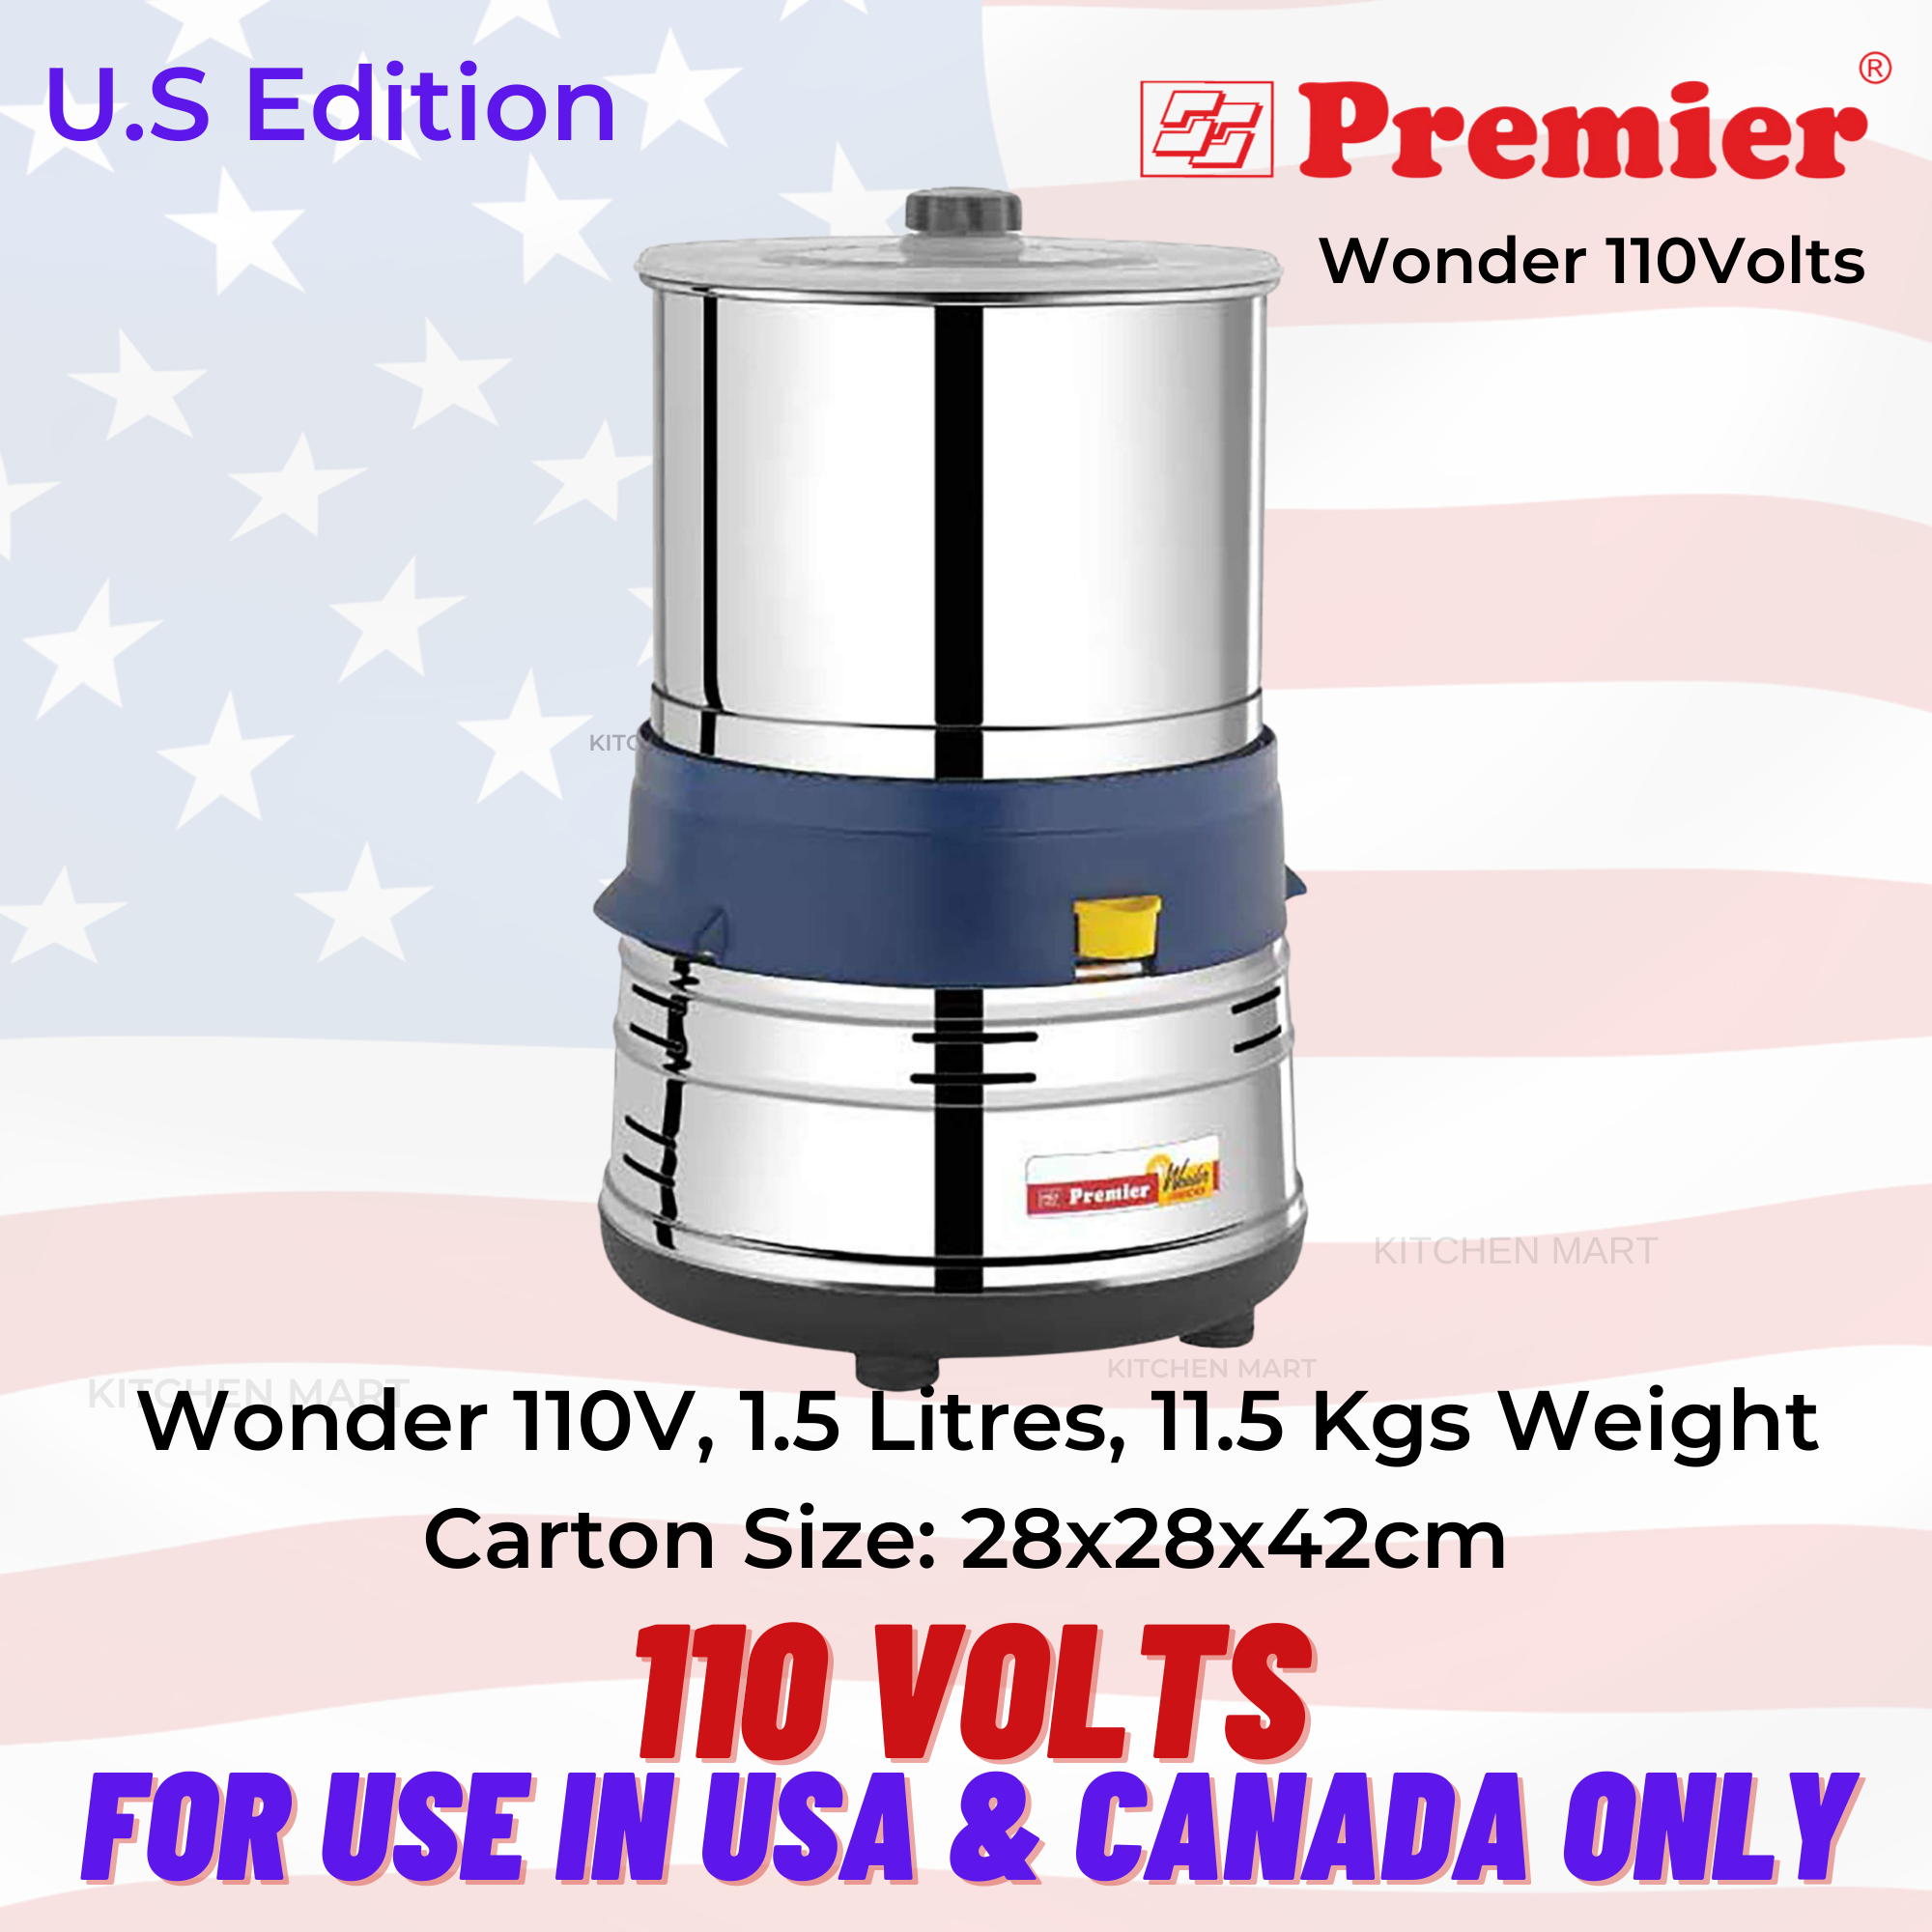 PREMIER Wonder Table Top Wet Grinder, 110 volts for use in USA & Canada only